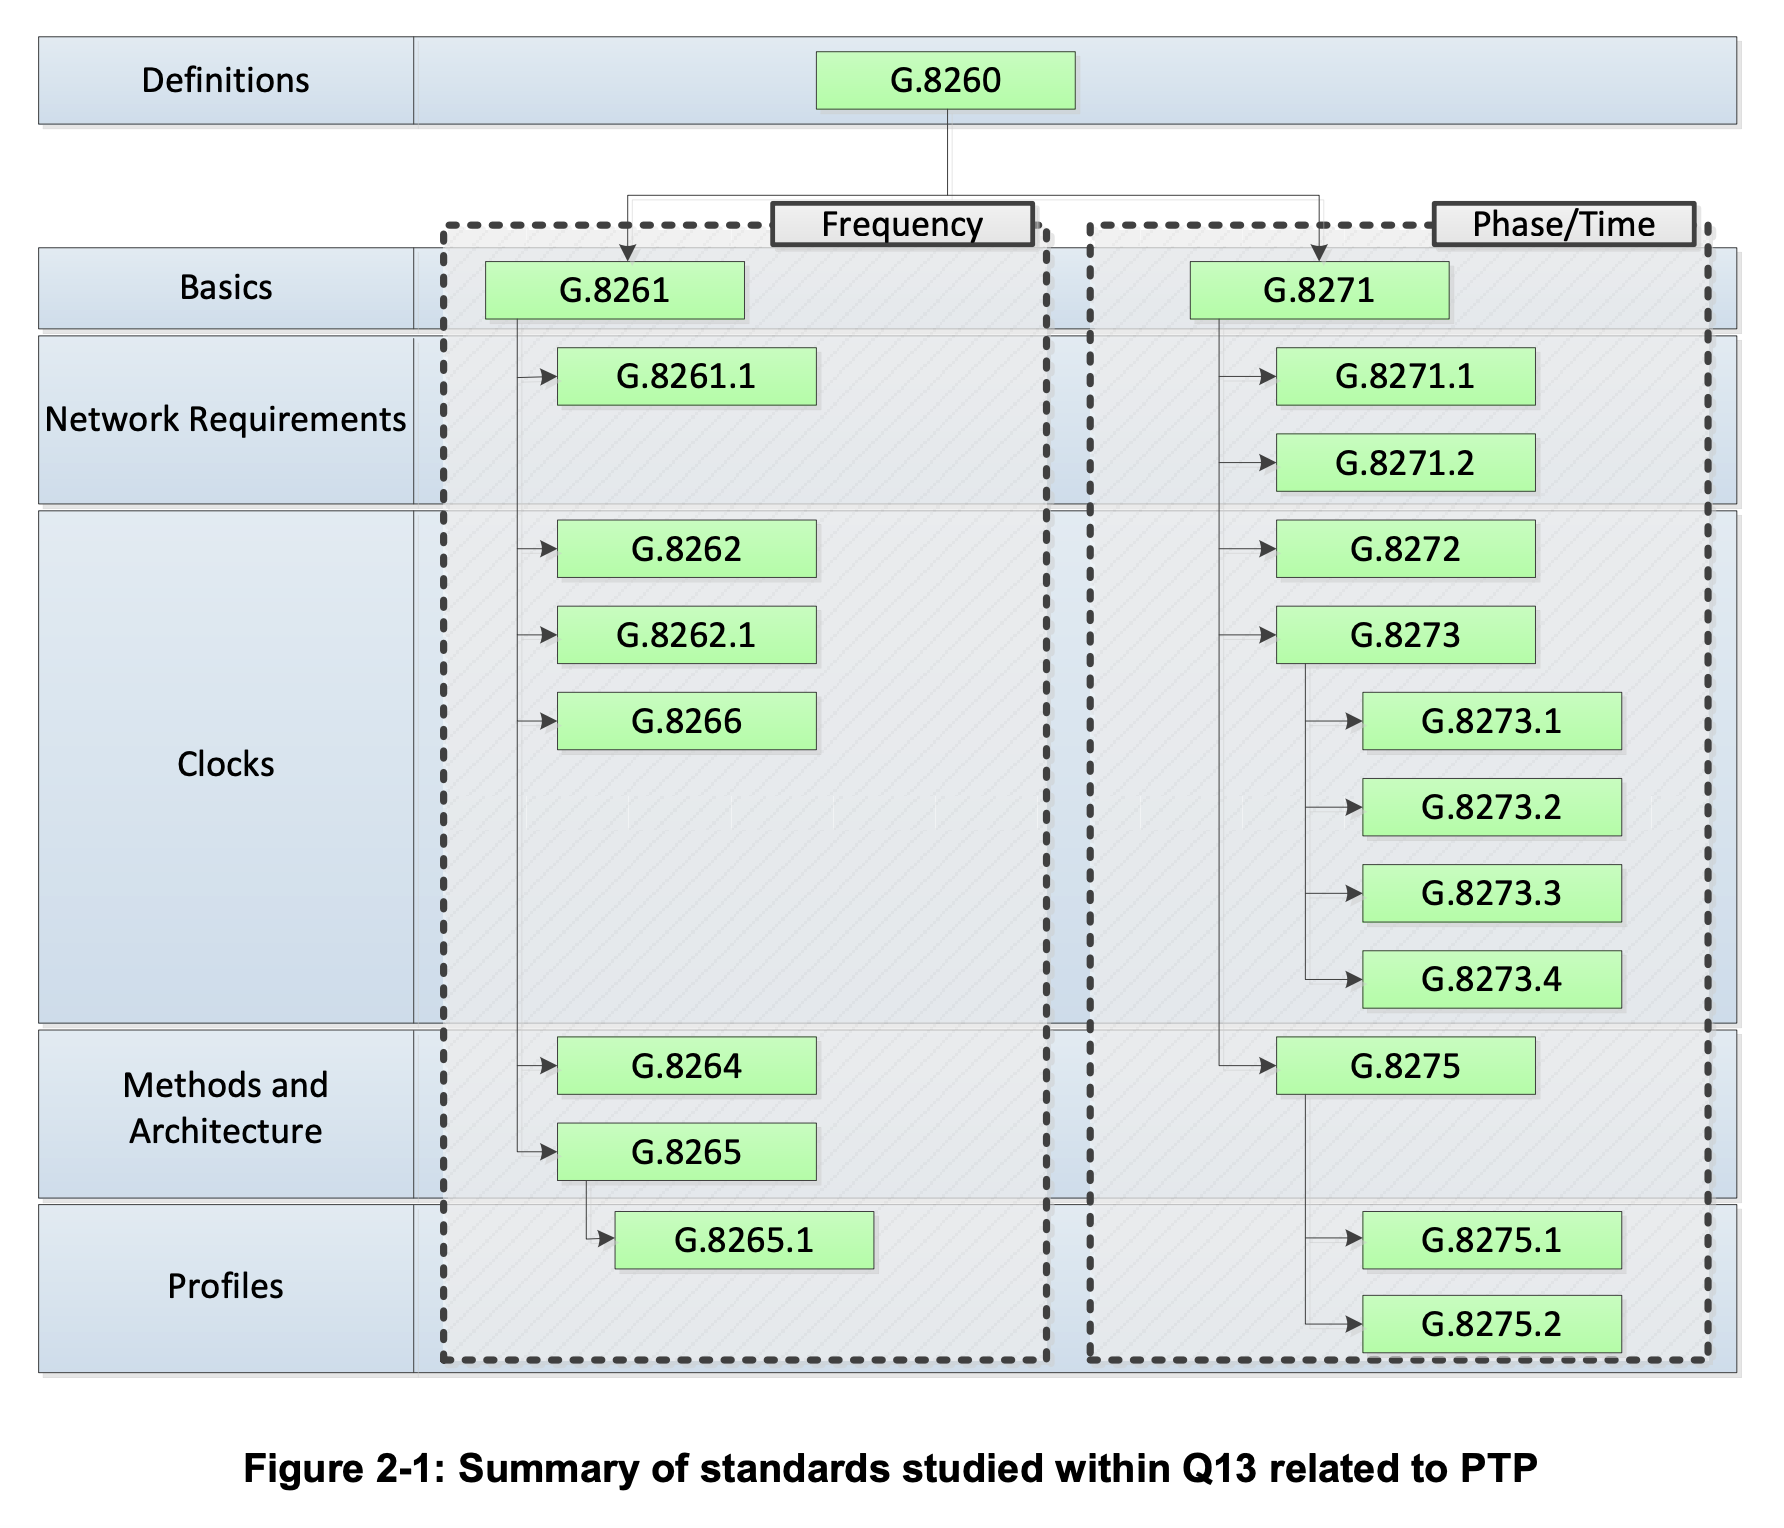 Figure 2-1 Summary of Standards studied within Q13 related to PTP